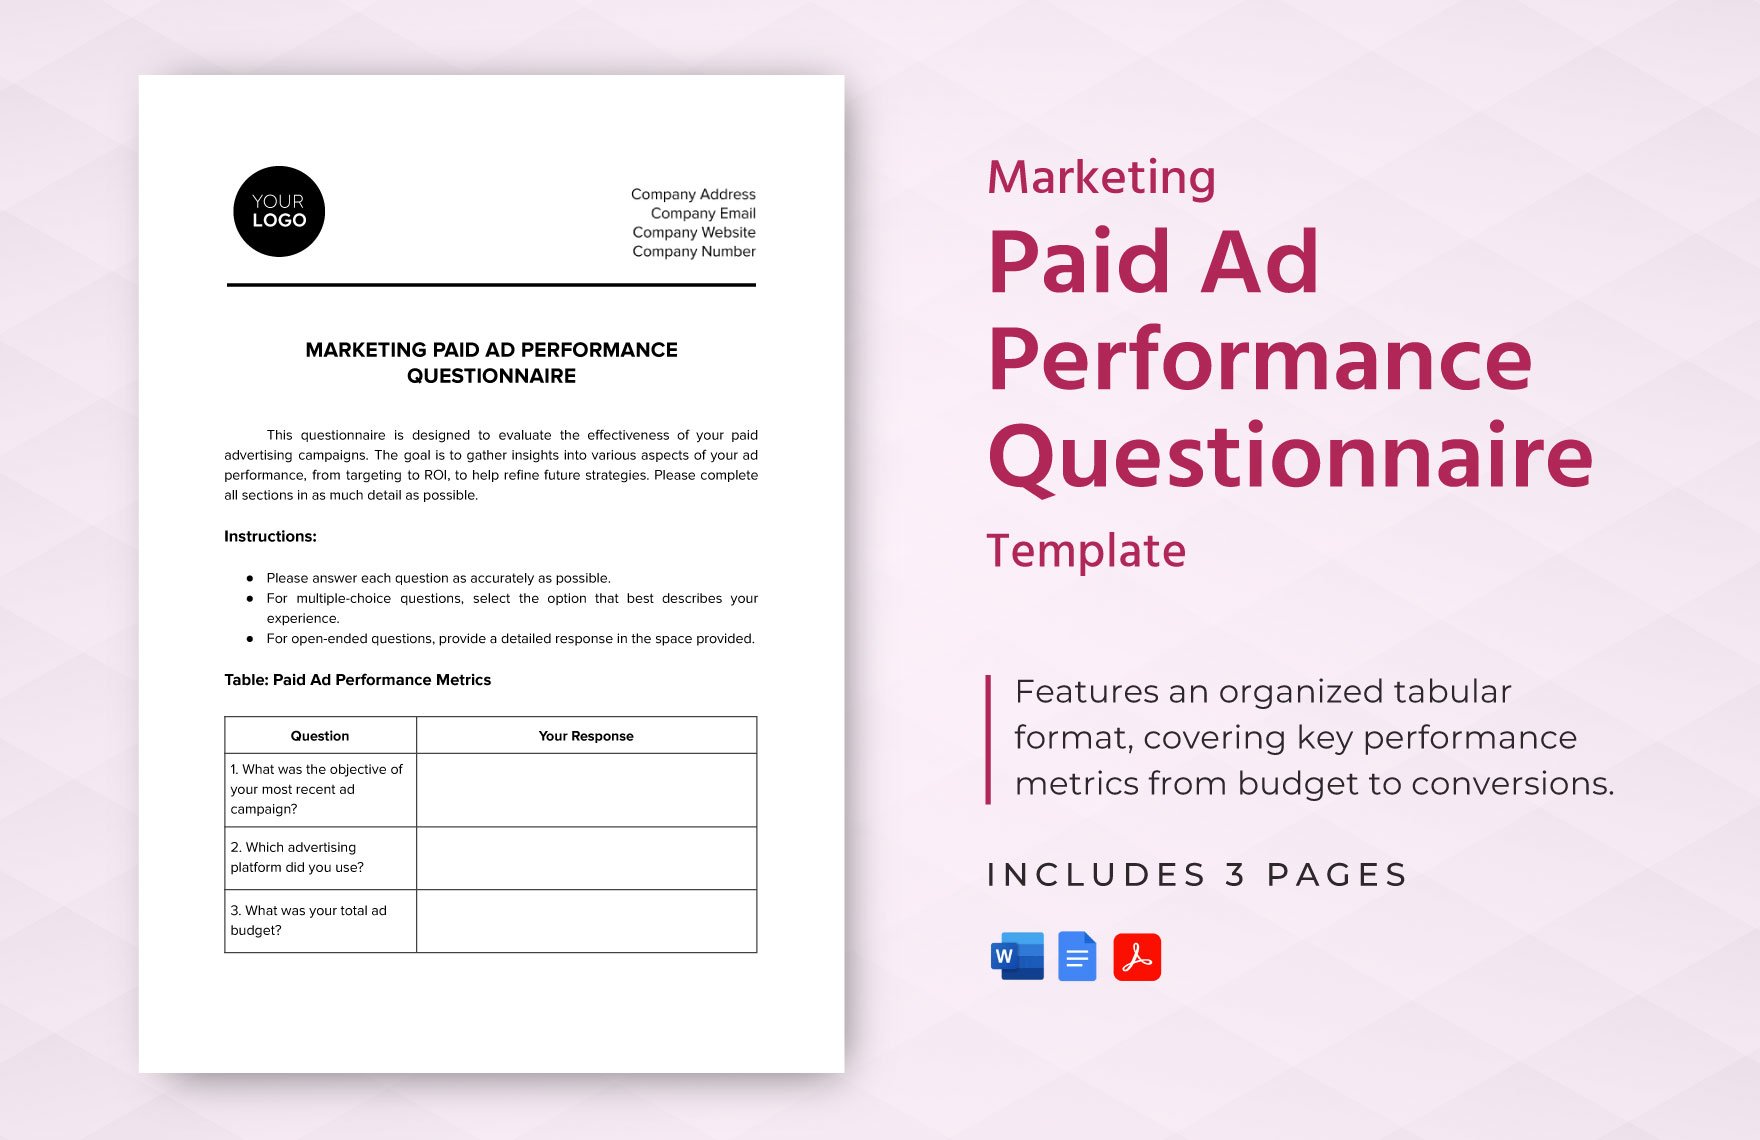 Marketing Paid Ad Performance Questionnaire Template